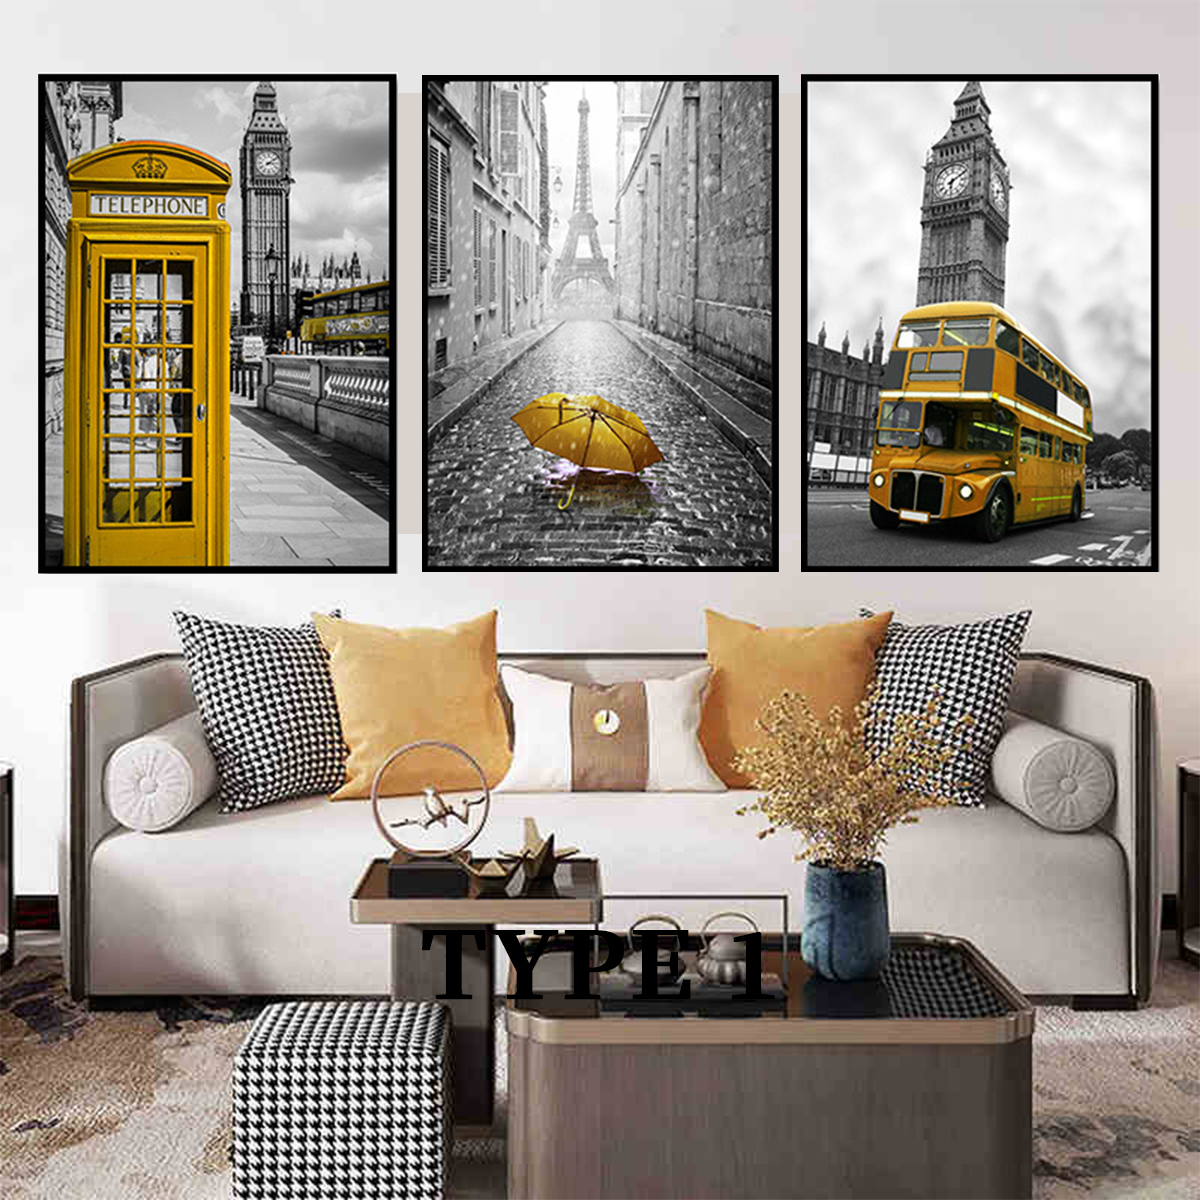 3Pcs-City-Scenery-Canvas-Paintings-Wall-Decorative-Print-Art-Pictures-Unframed-Wall-Hanging-Home-Off-1783981-12